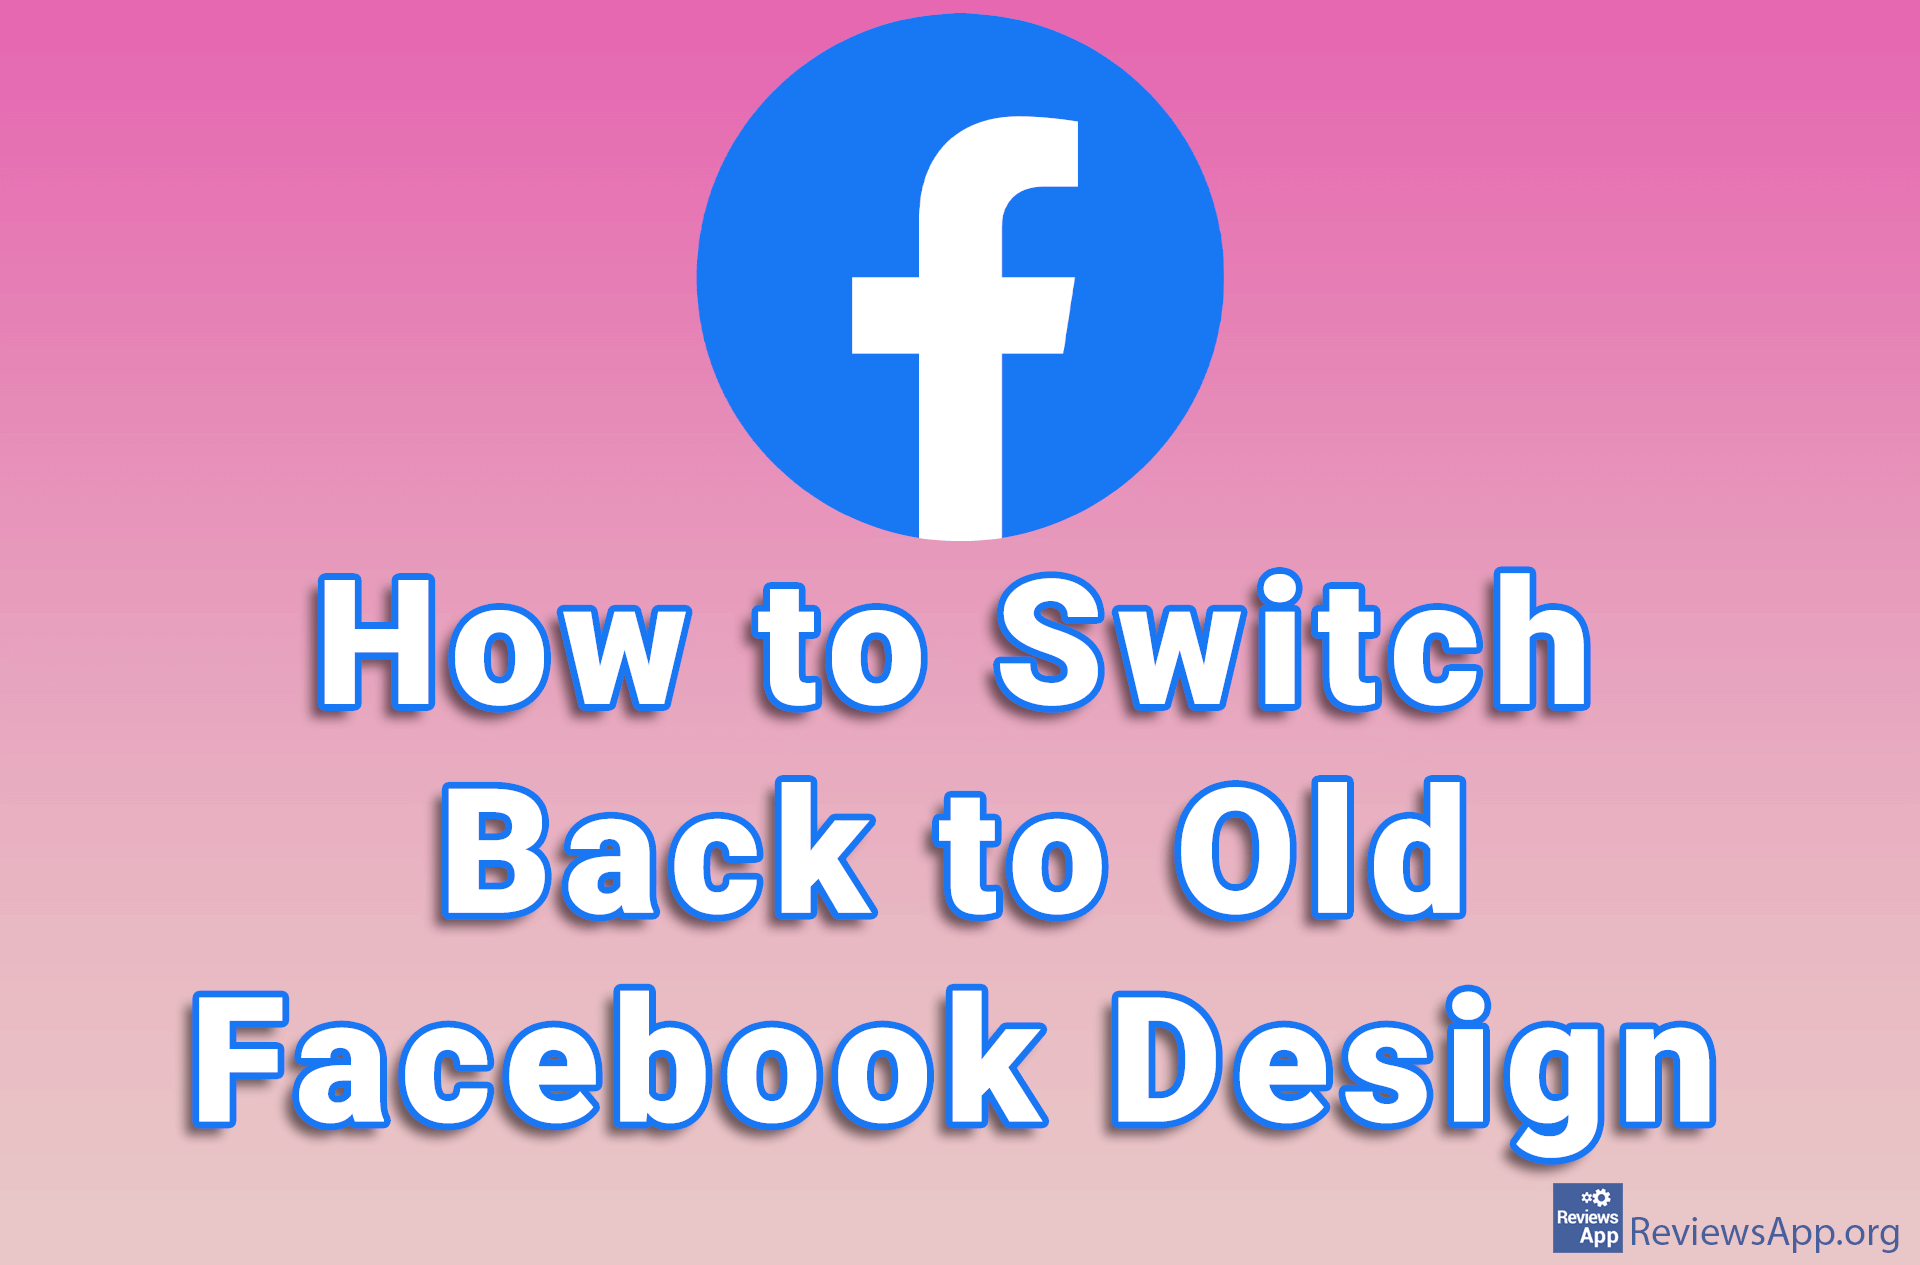 How to Switch Back to Old Facebook Design